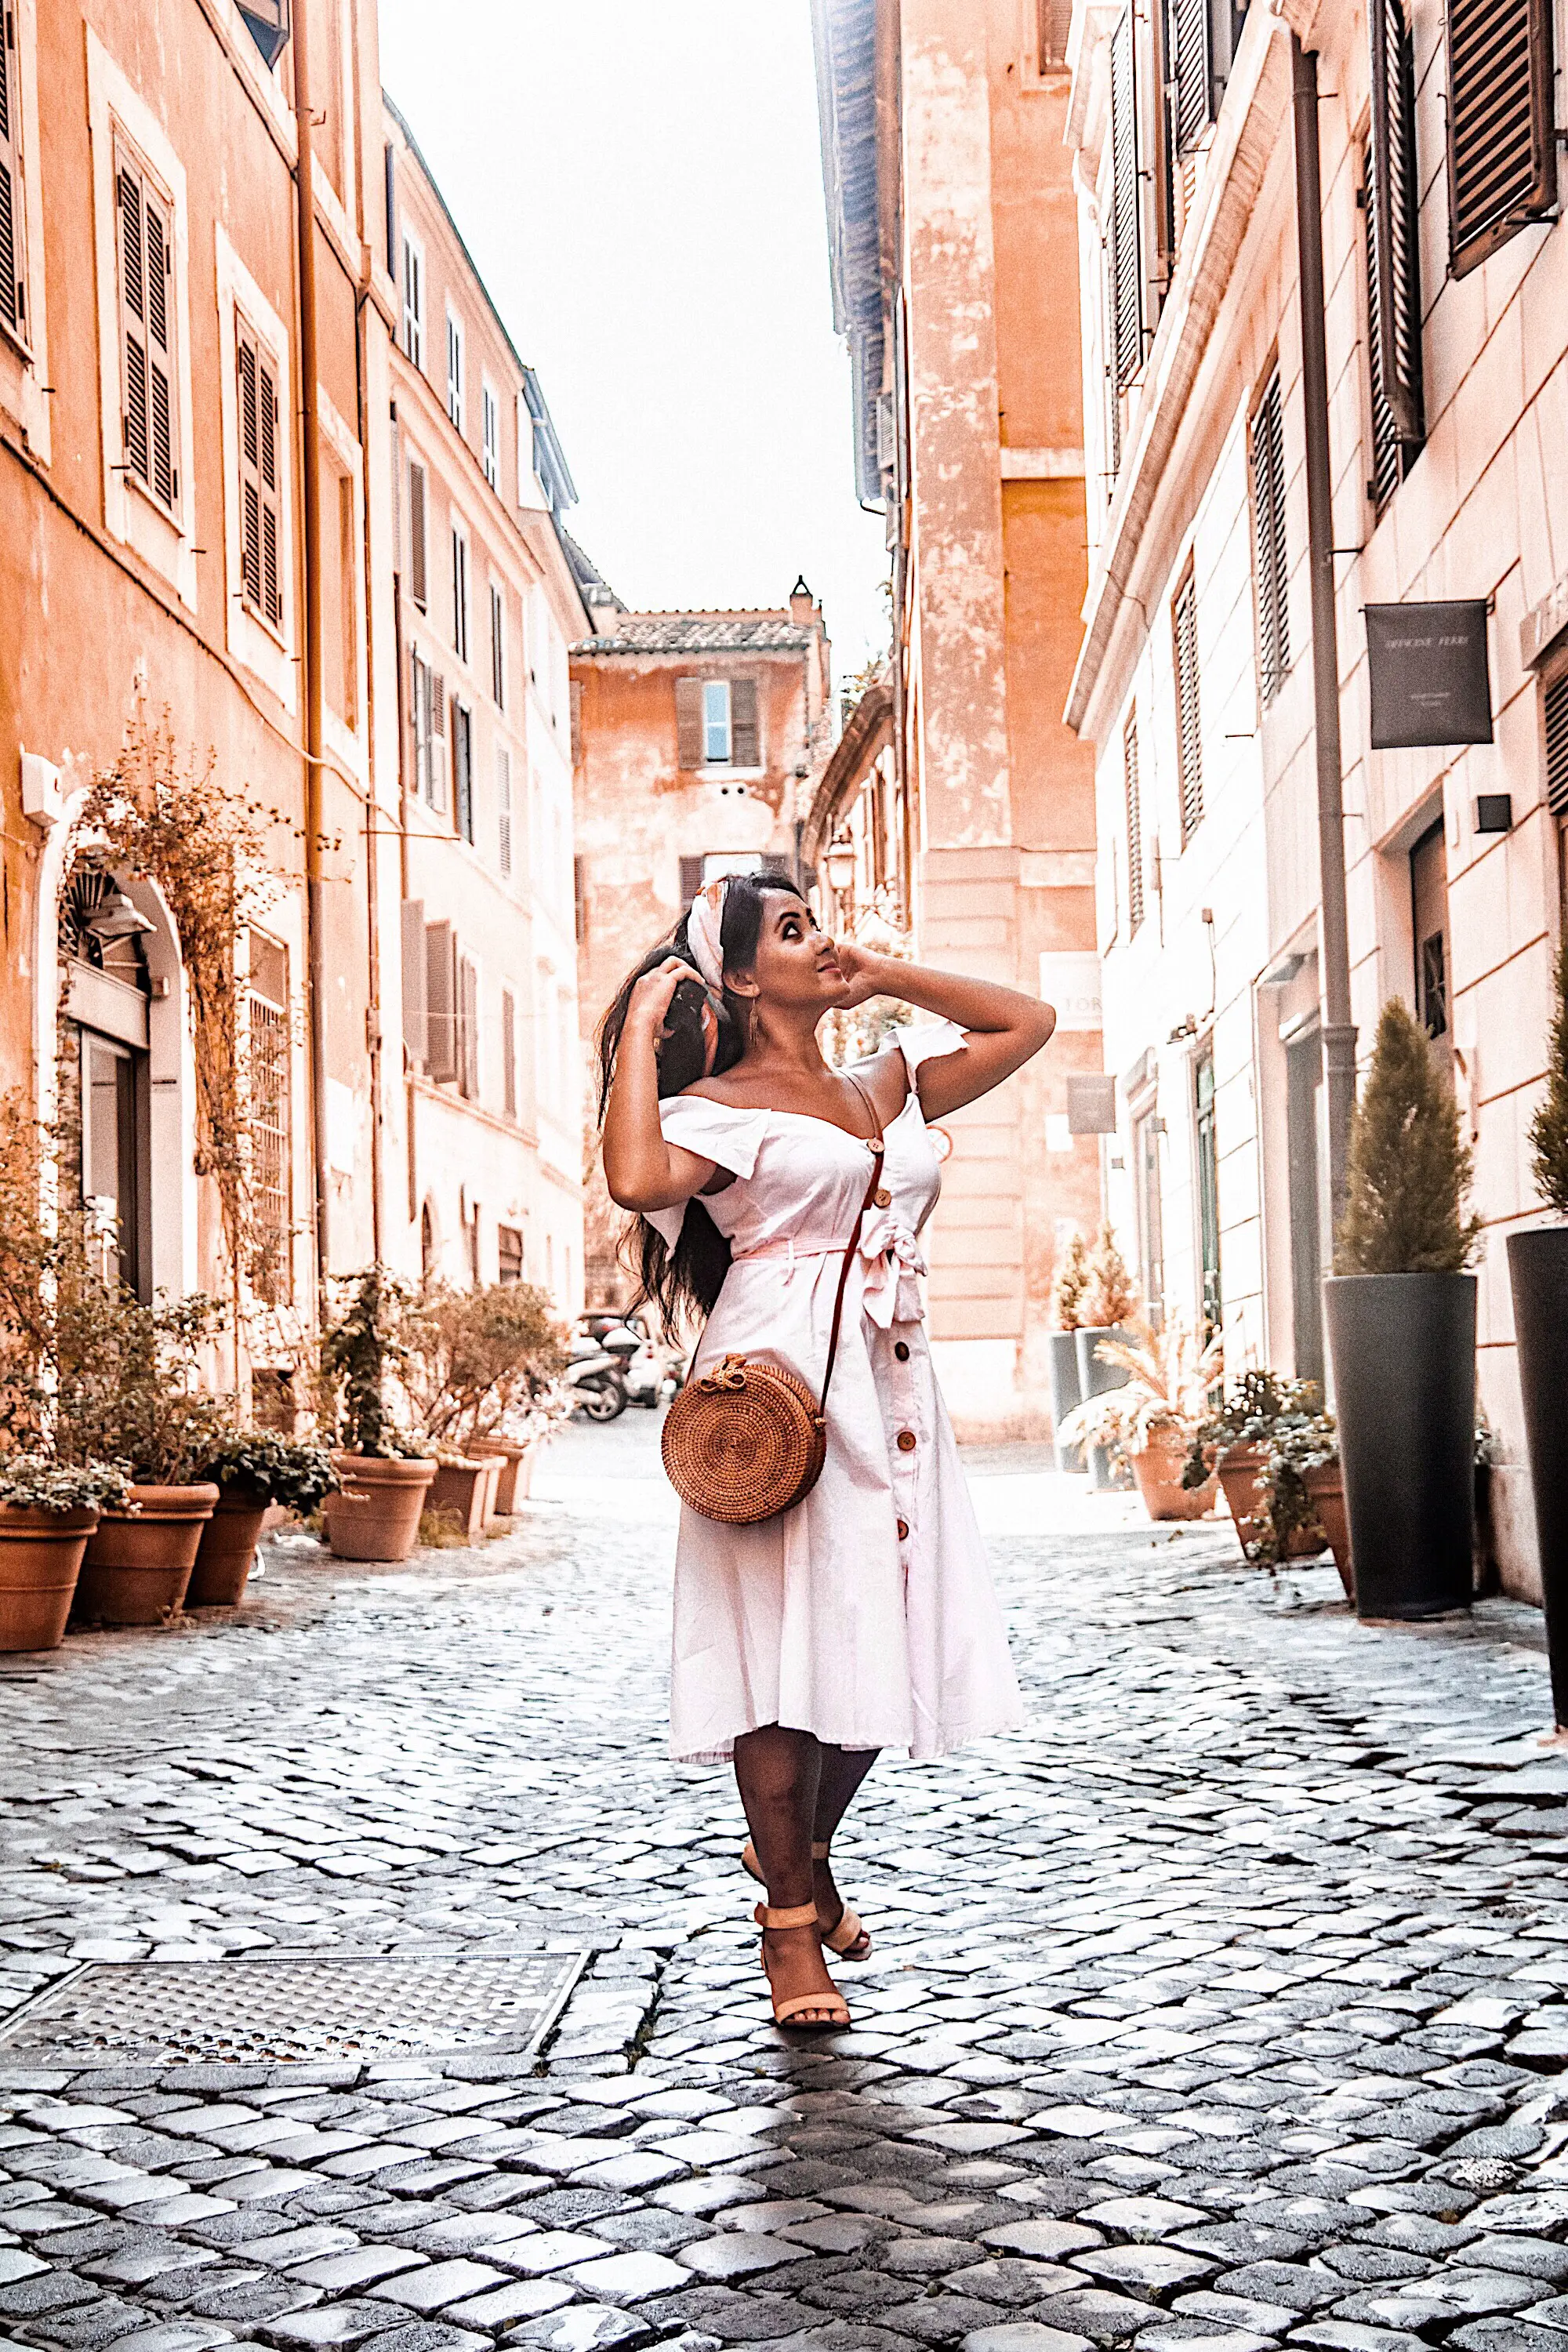 How-To-Wear-Off-Shoulder-Dress-Light-Blush-Pink-Button-Down-Dress-Rattan-Straw-Basket-Bag-Flat-Sandal-Headwrap-Paris-Chic-Style-Fashion-Lookbook-Street-Style-Rome-Italy-ootd Outfit Of The Day-6